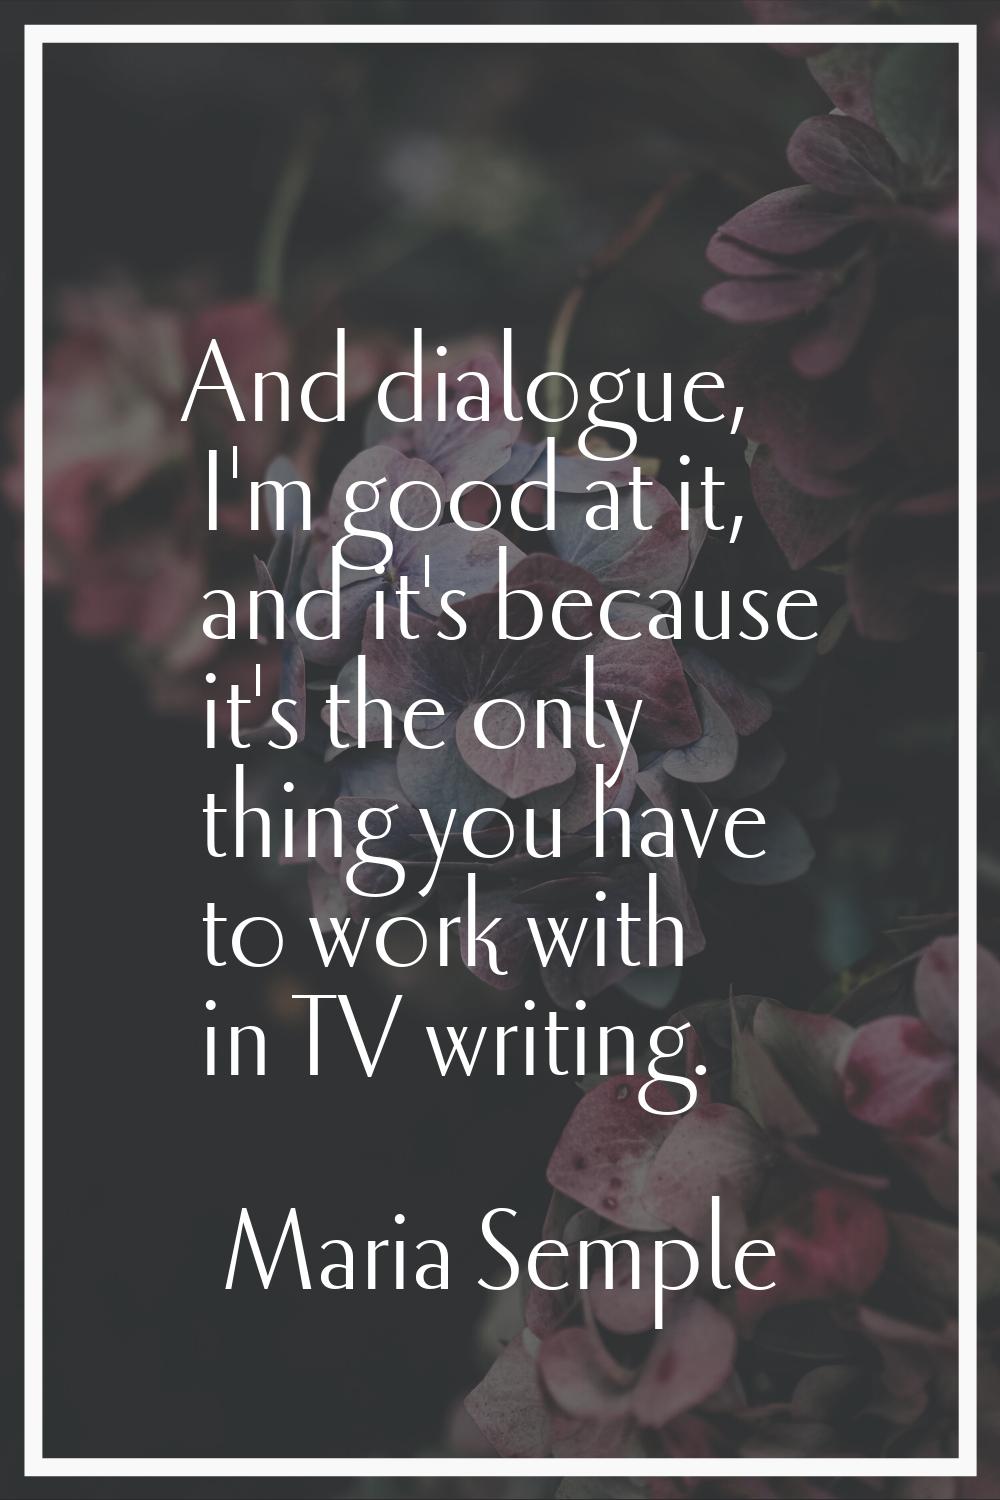 And dialogue, I'm good at it, and it's because it's the only thing you have to work with in TV writ